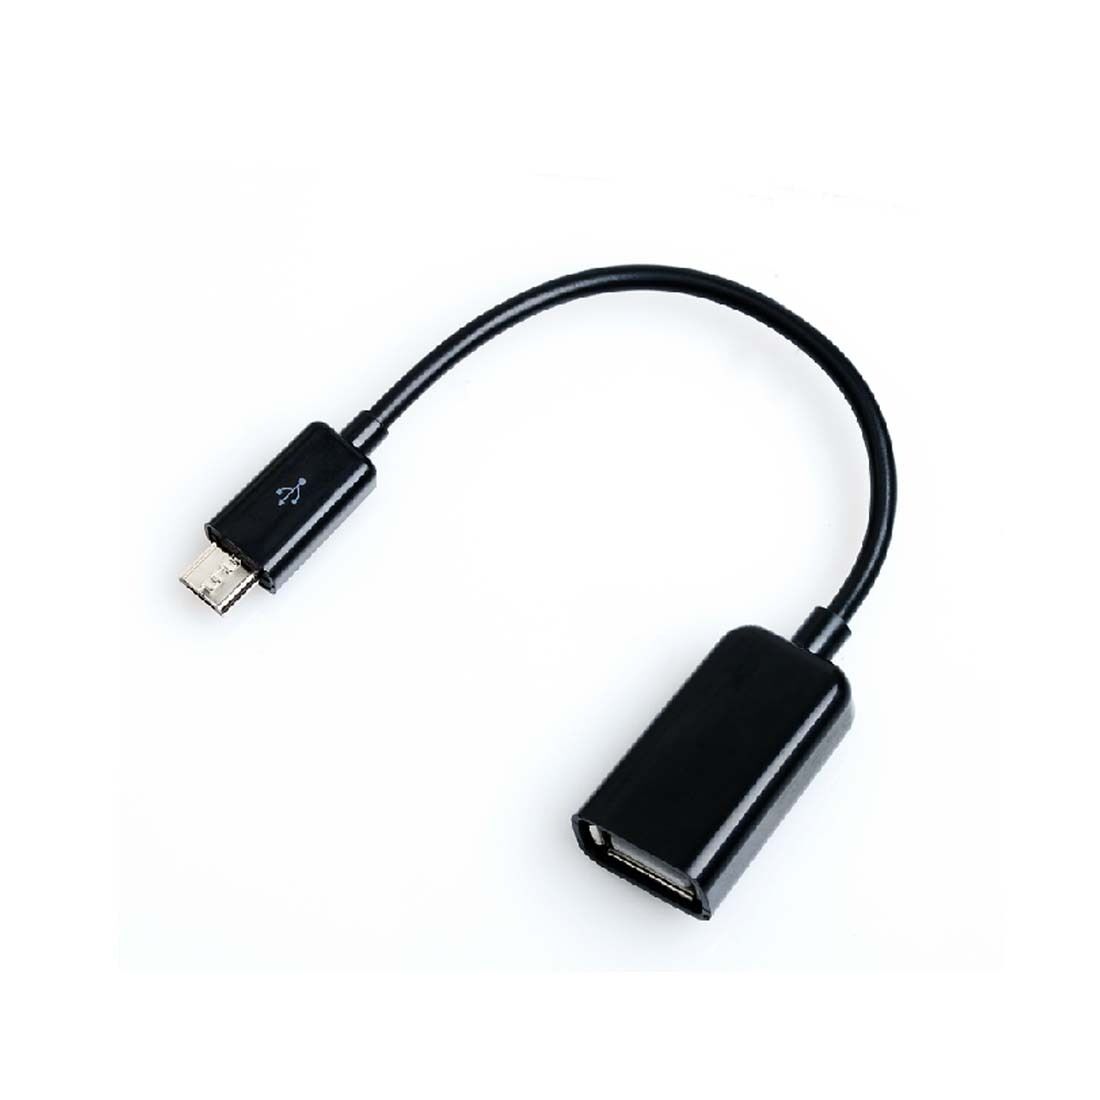 USB OTG Sale Adaptor Adapter Cable Outlet SALE Cord For Arnova 9-G2 9-G3 7 7d-G2